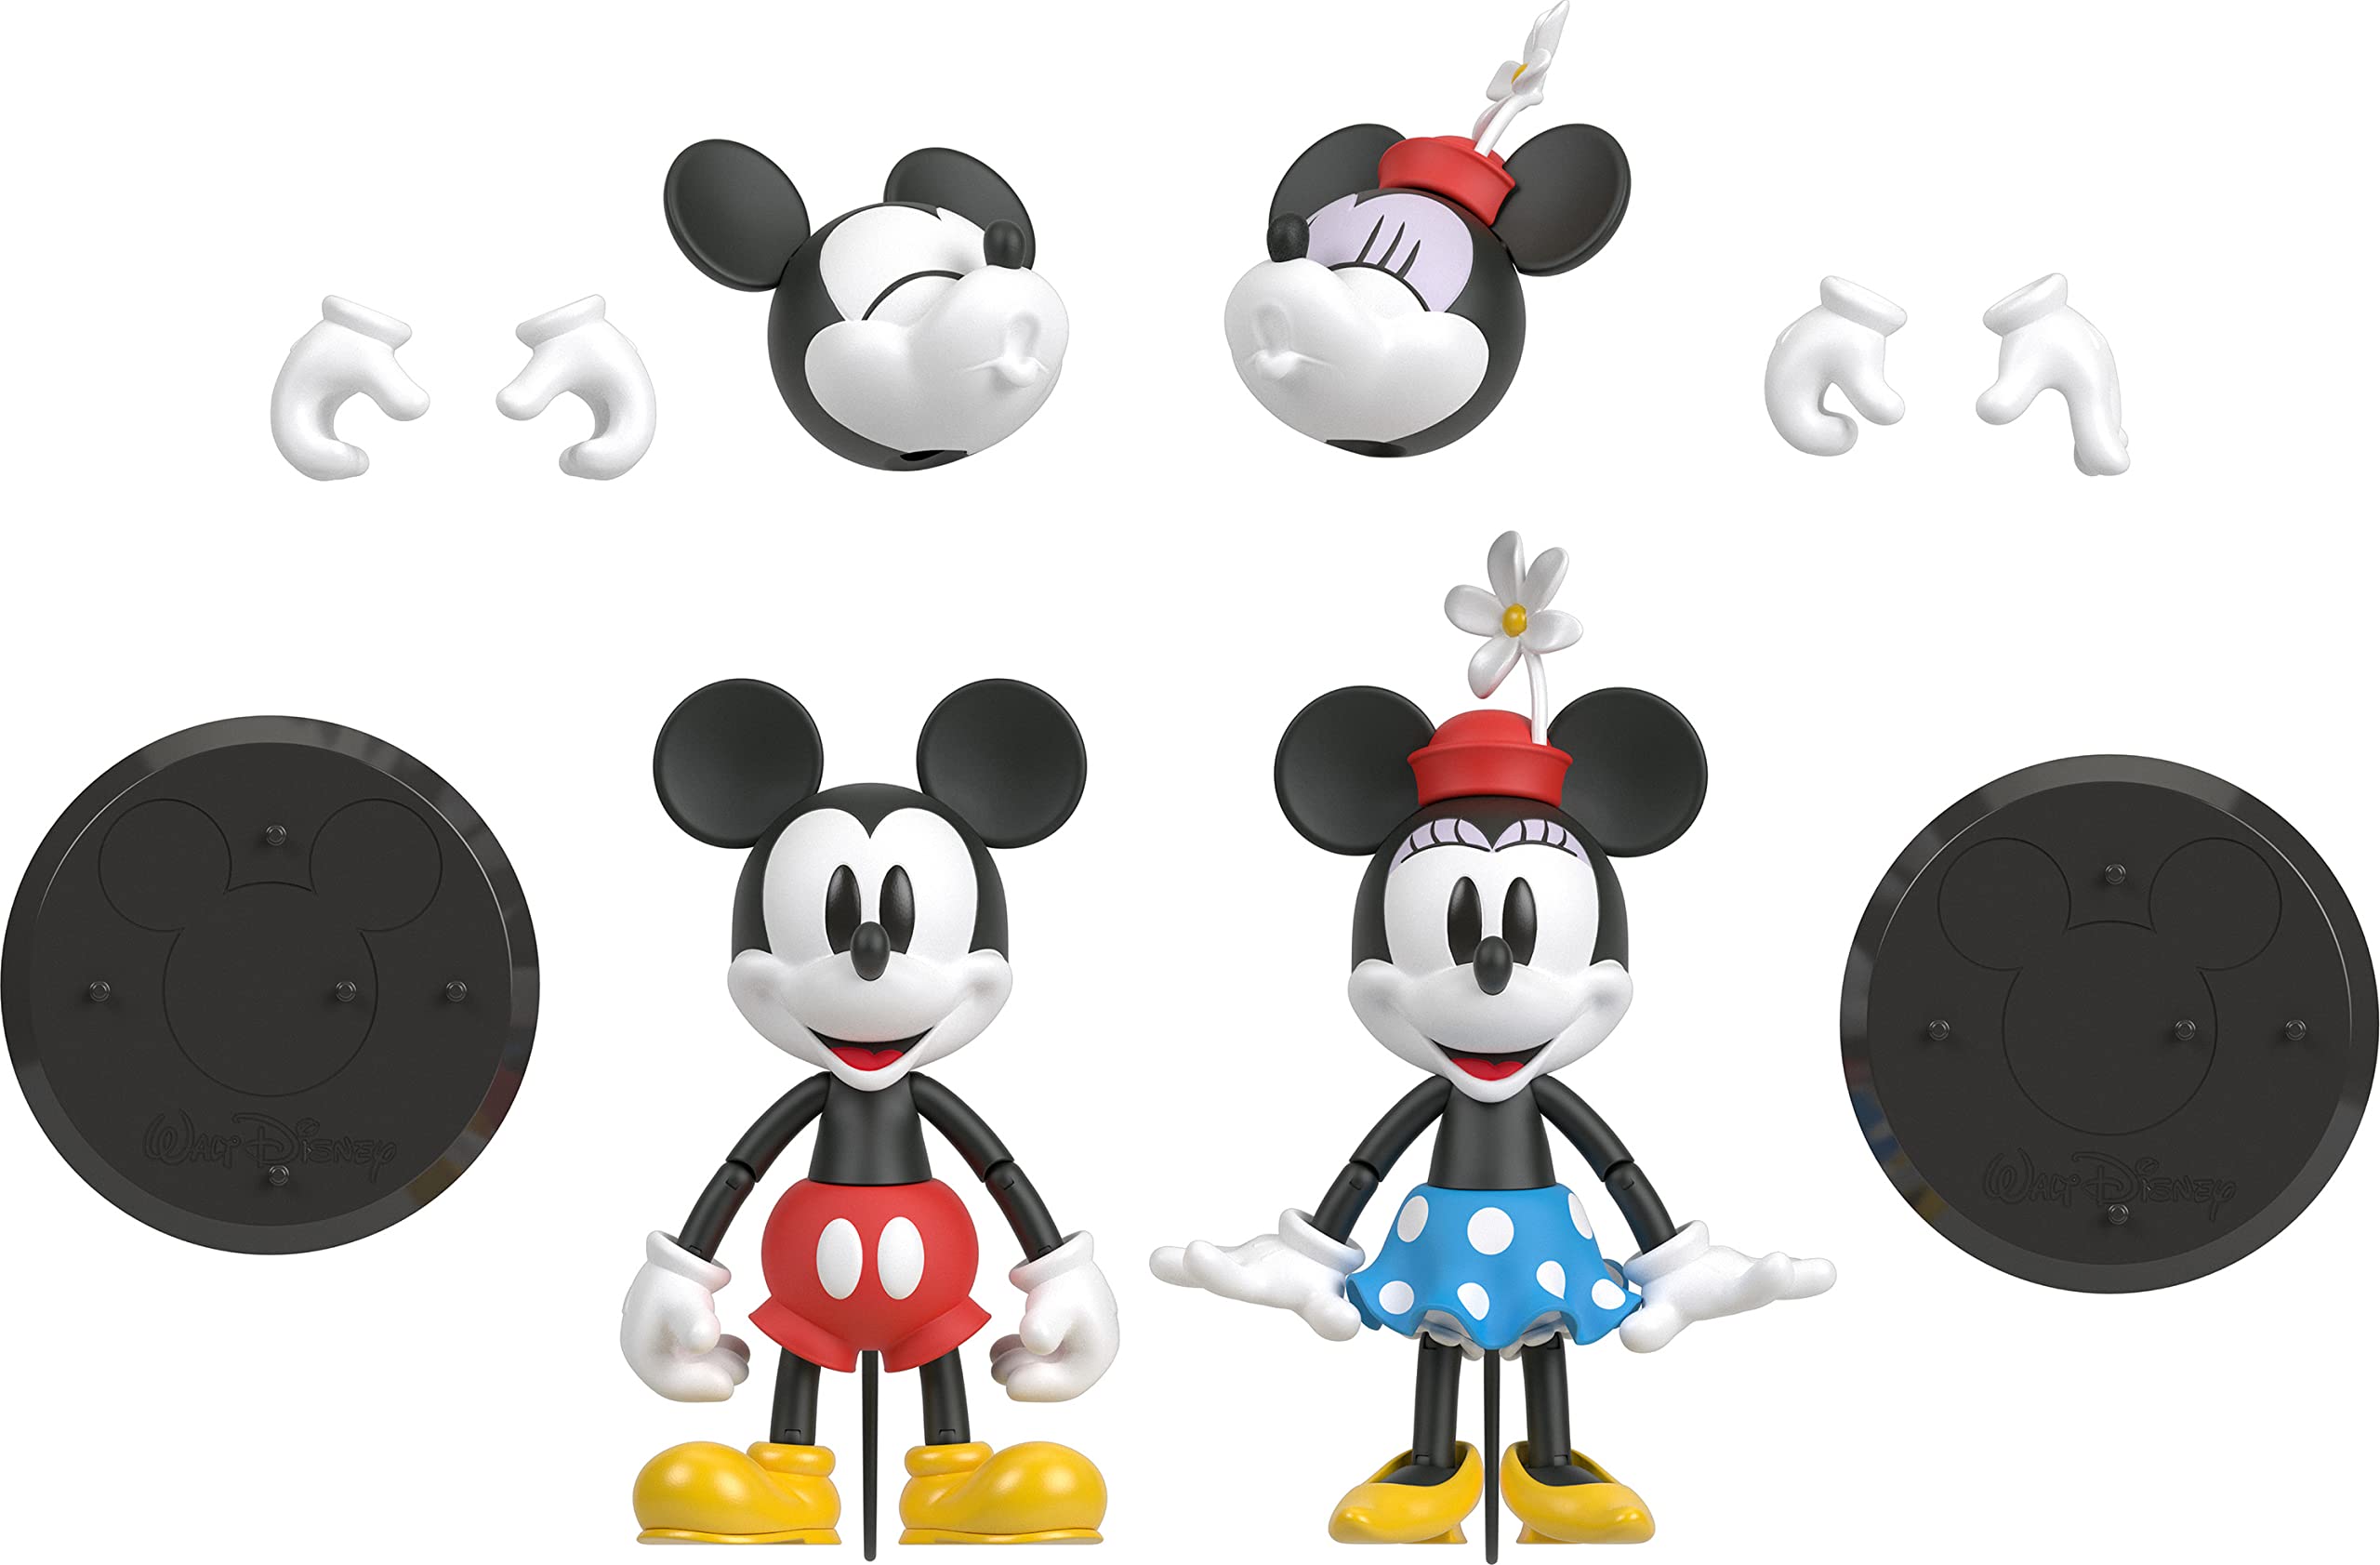 Disney 100 Collectible Action Figures Mickey and Minnie Mouse $15.99 + Free Shipping w/ Prime or on $35+